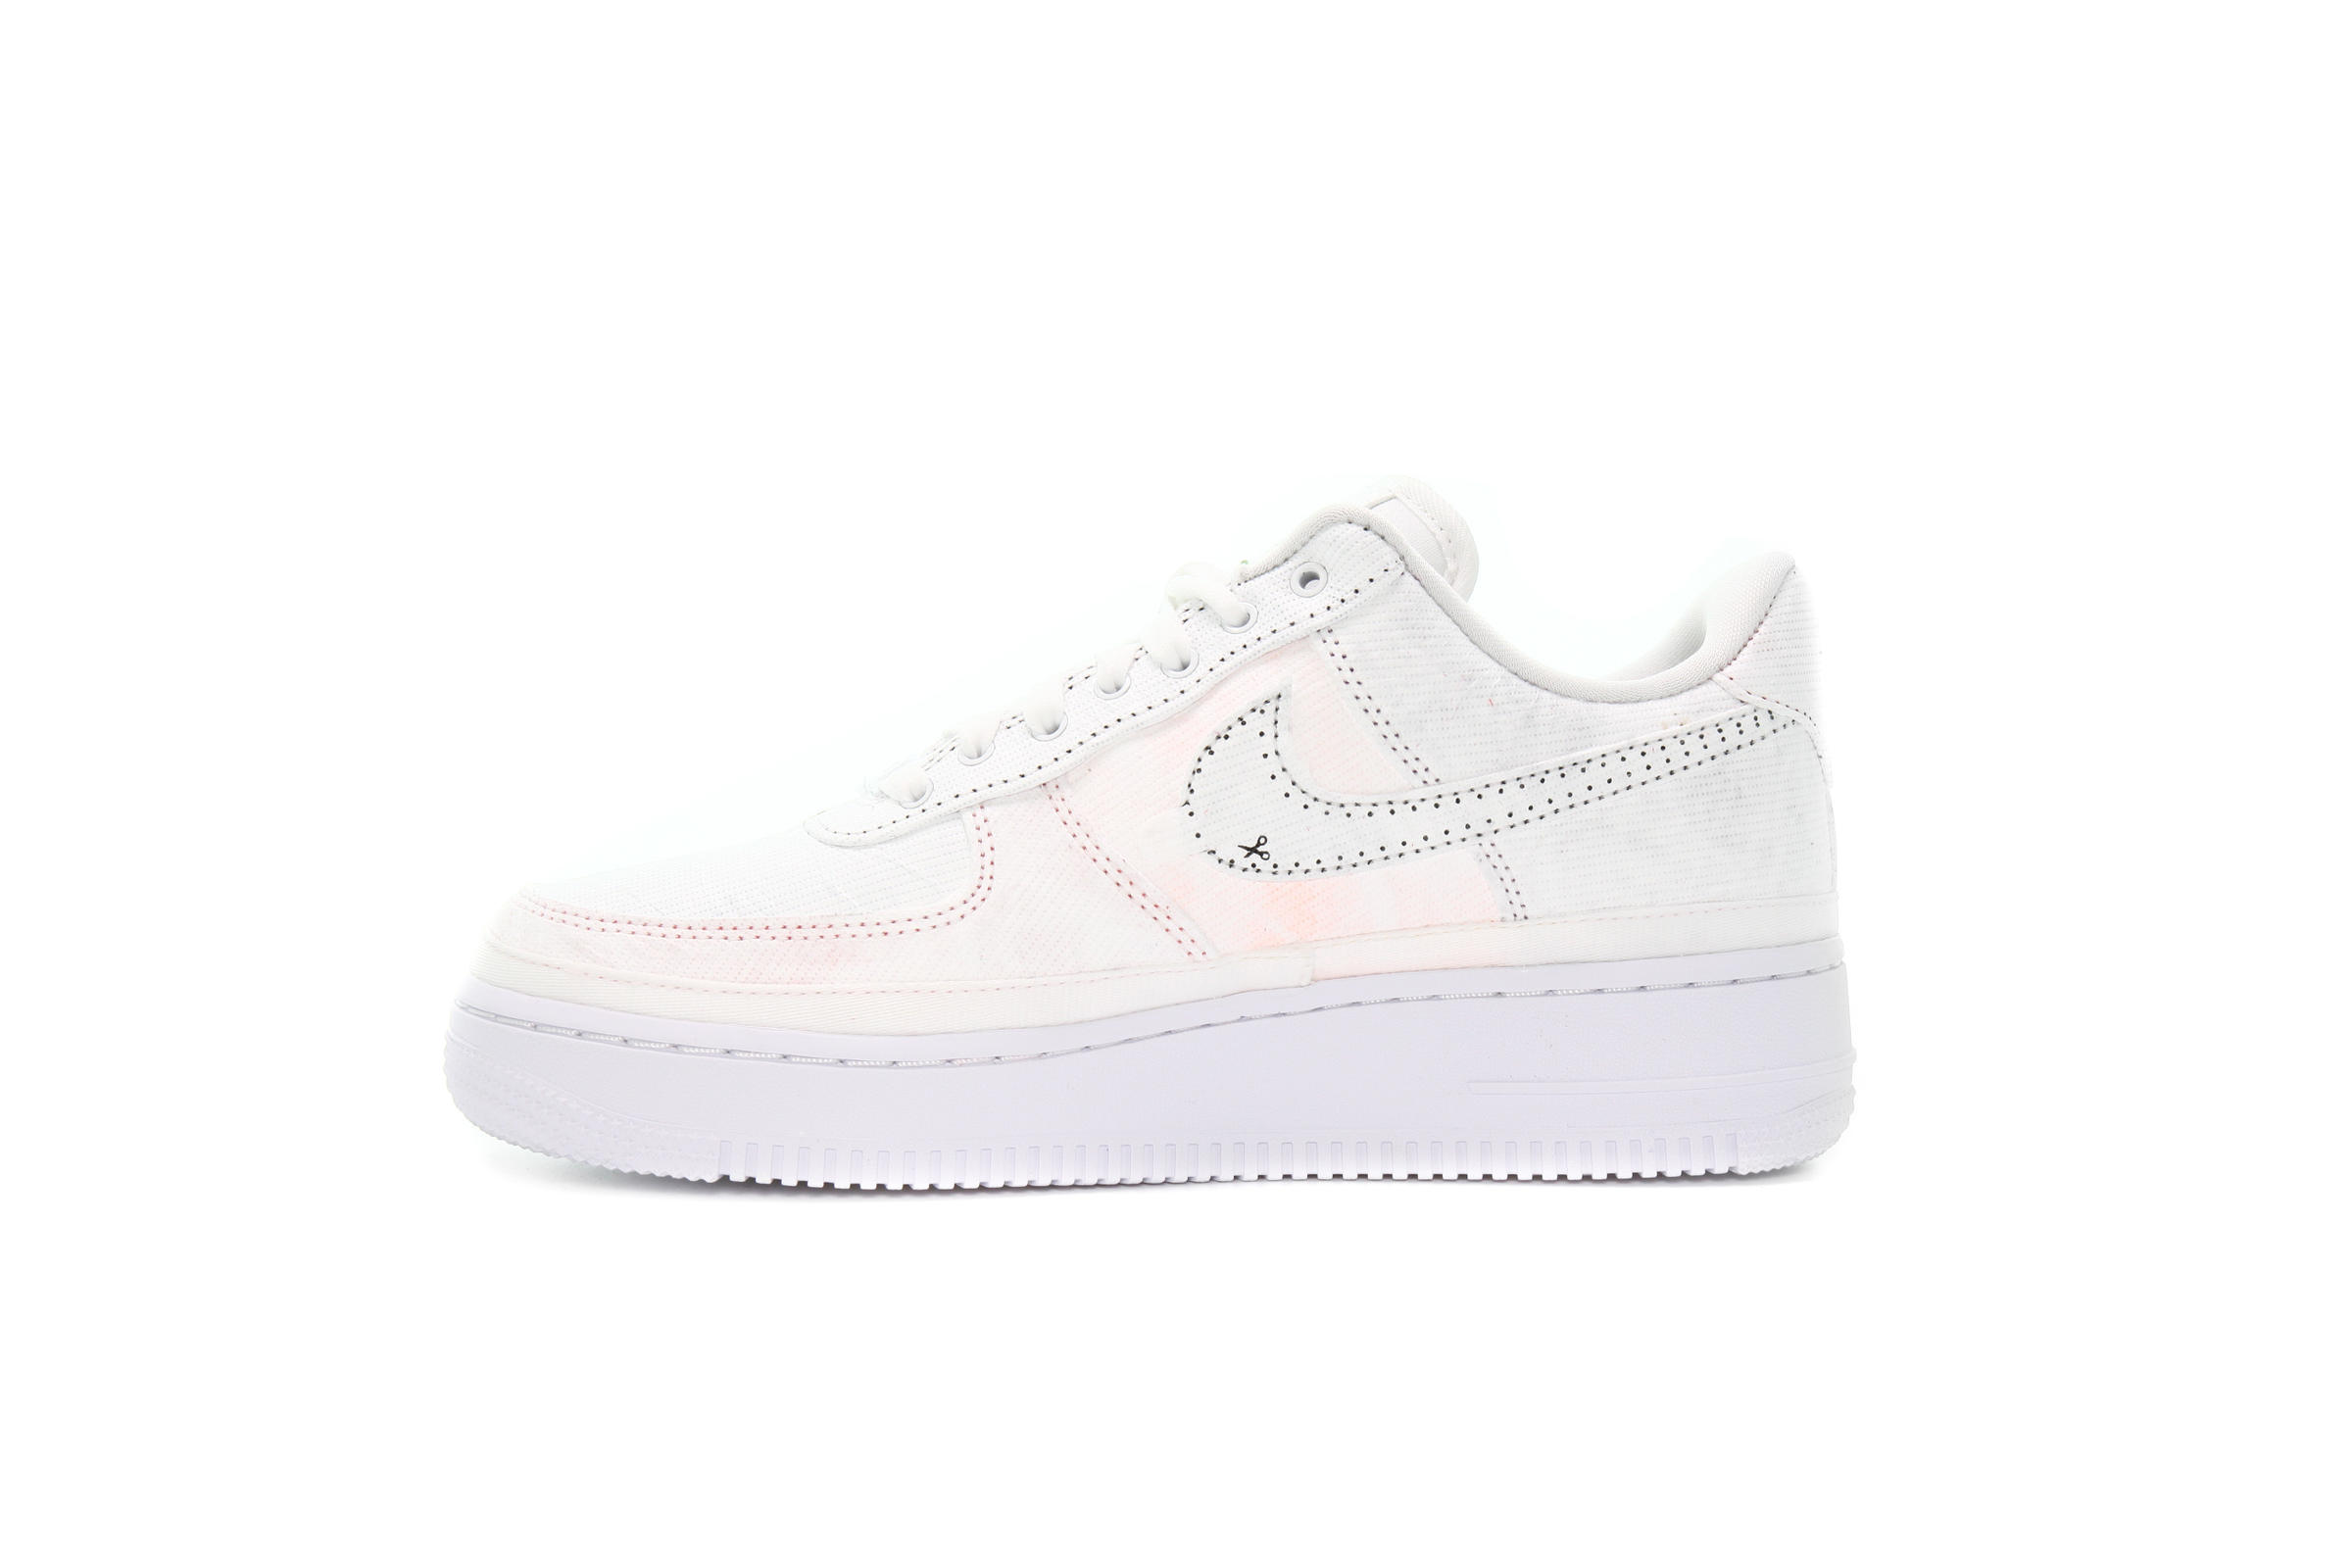 Nike WMNS AIR FORCE 1 '07 LX TEARAWAY "RED SWOOSH"